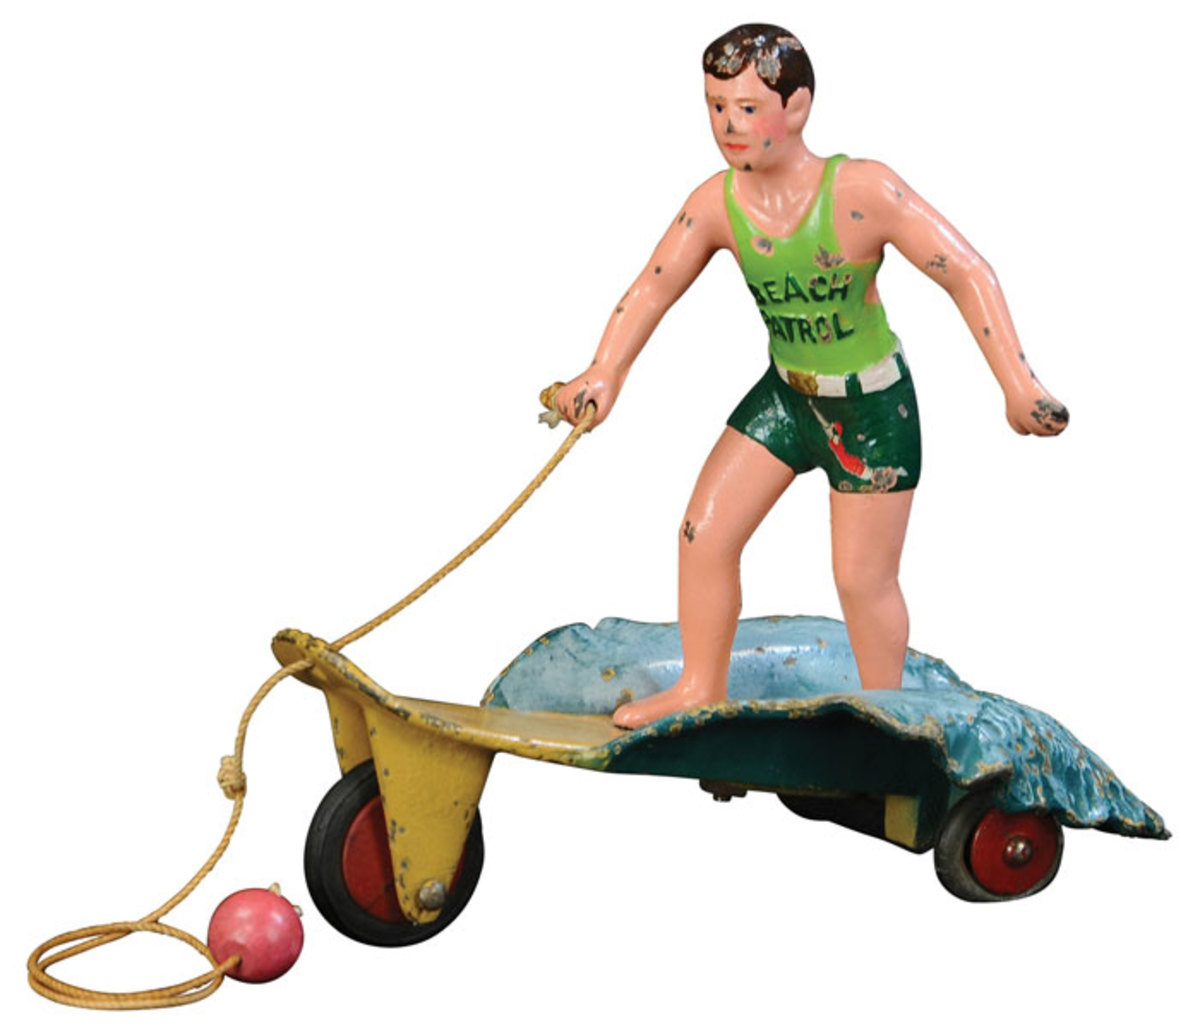 Hubley Surfer Boy cast-iron pull toy from a line of toys originally used to advertise Jantzen swimwear, complete with decals and original pull cord; estimate: $10,000-$15,000.